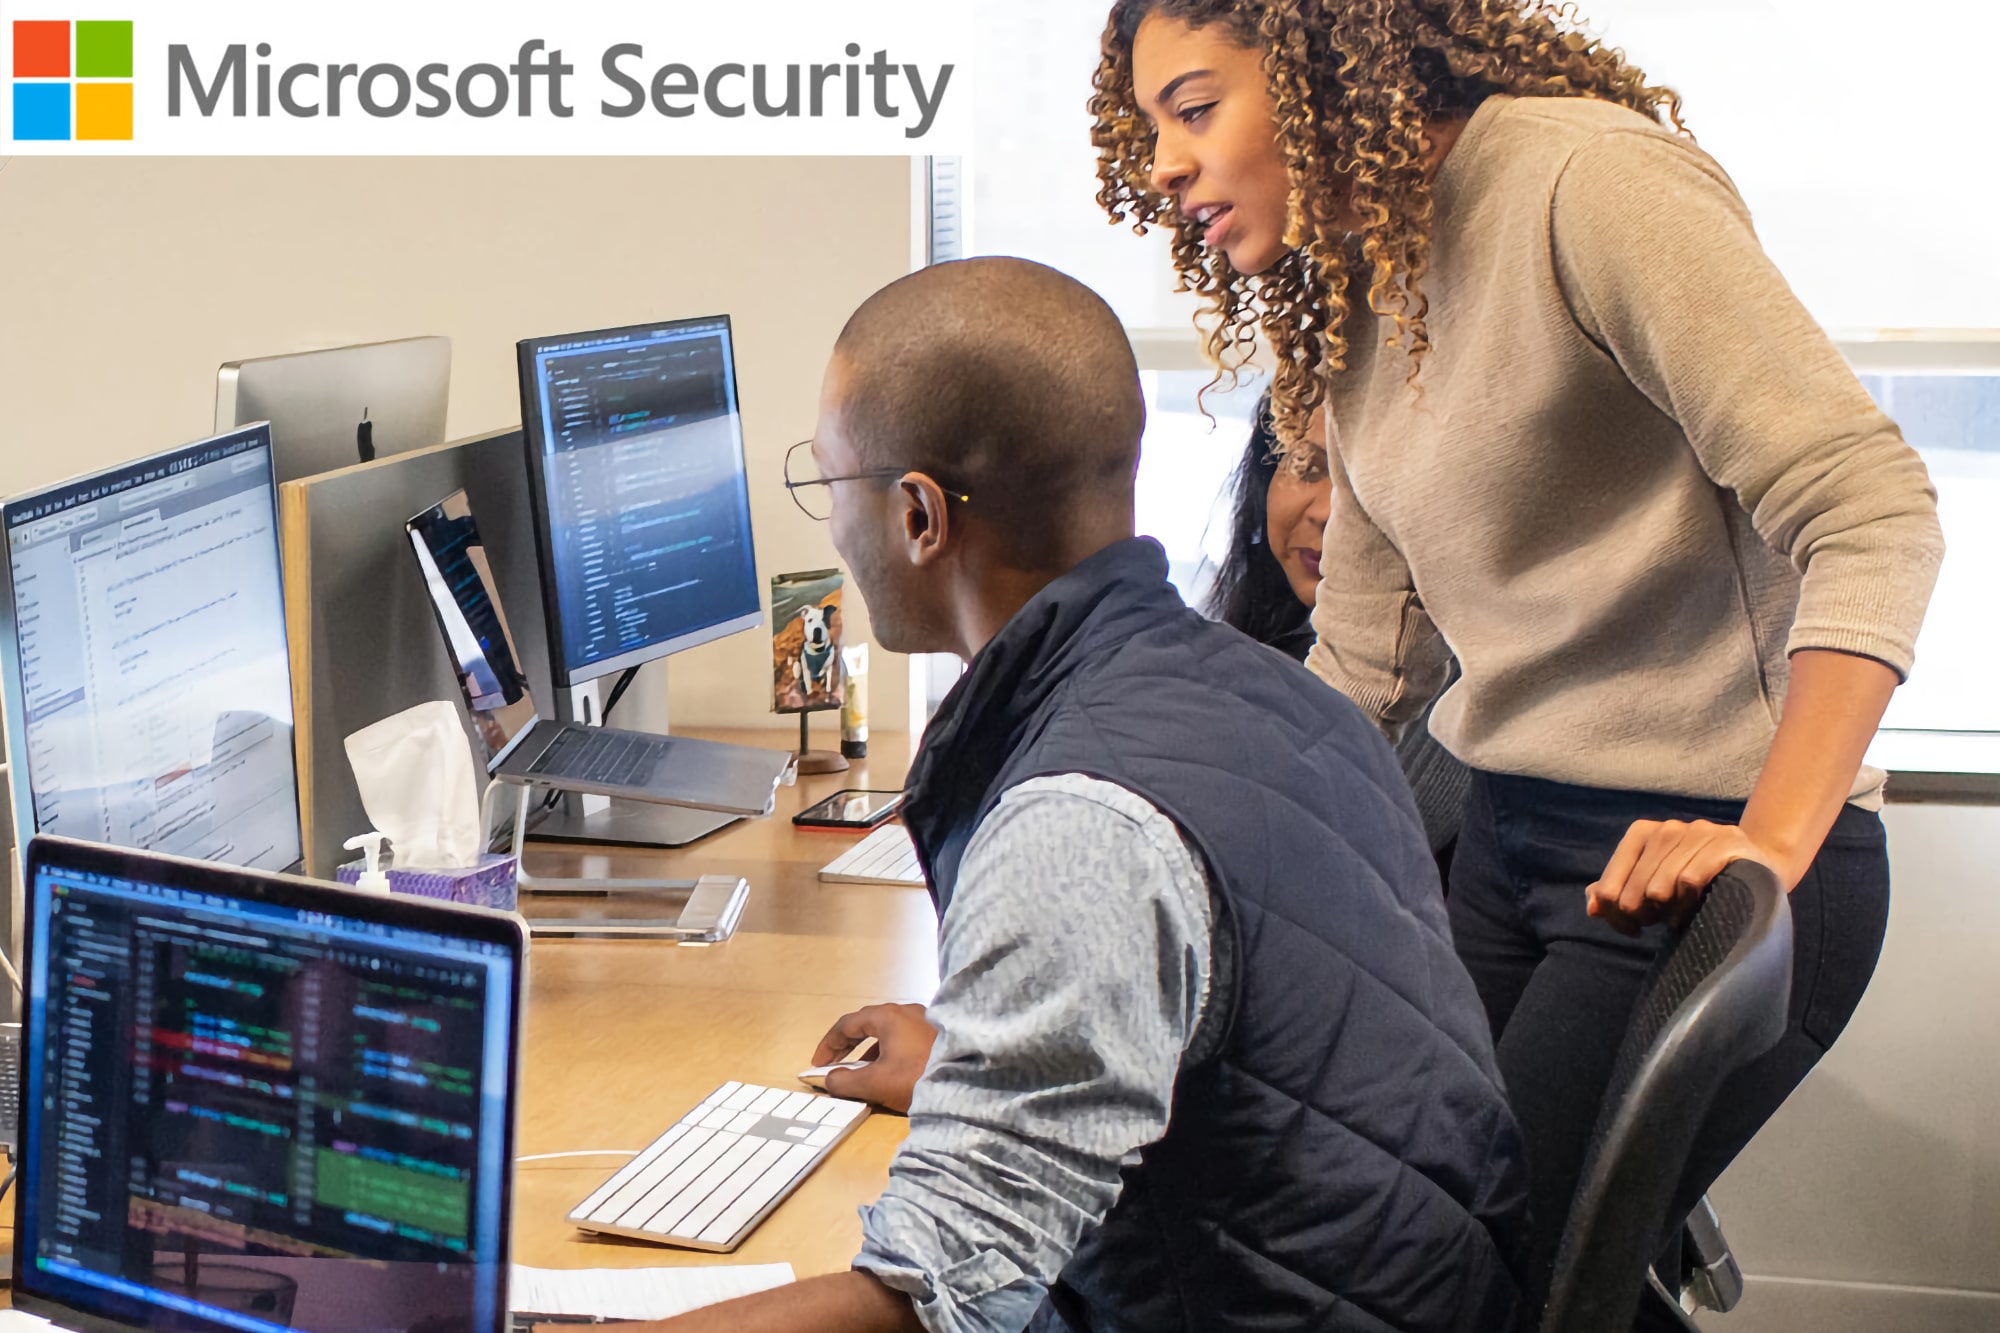 Microsoft Security logo appears in the corner of a scene with IT workers at computers